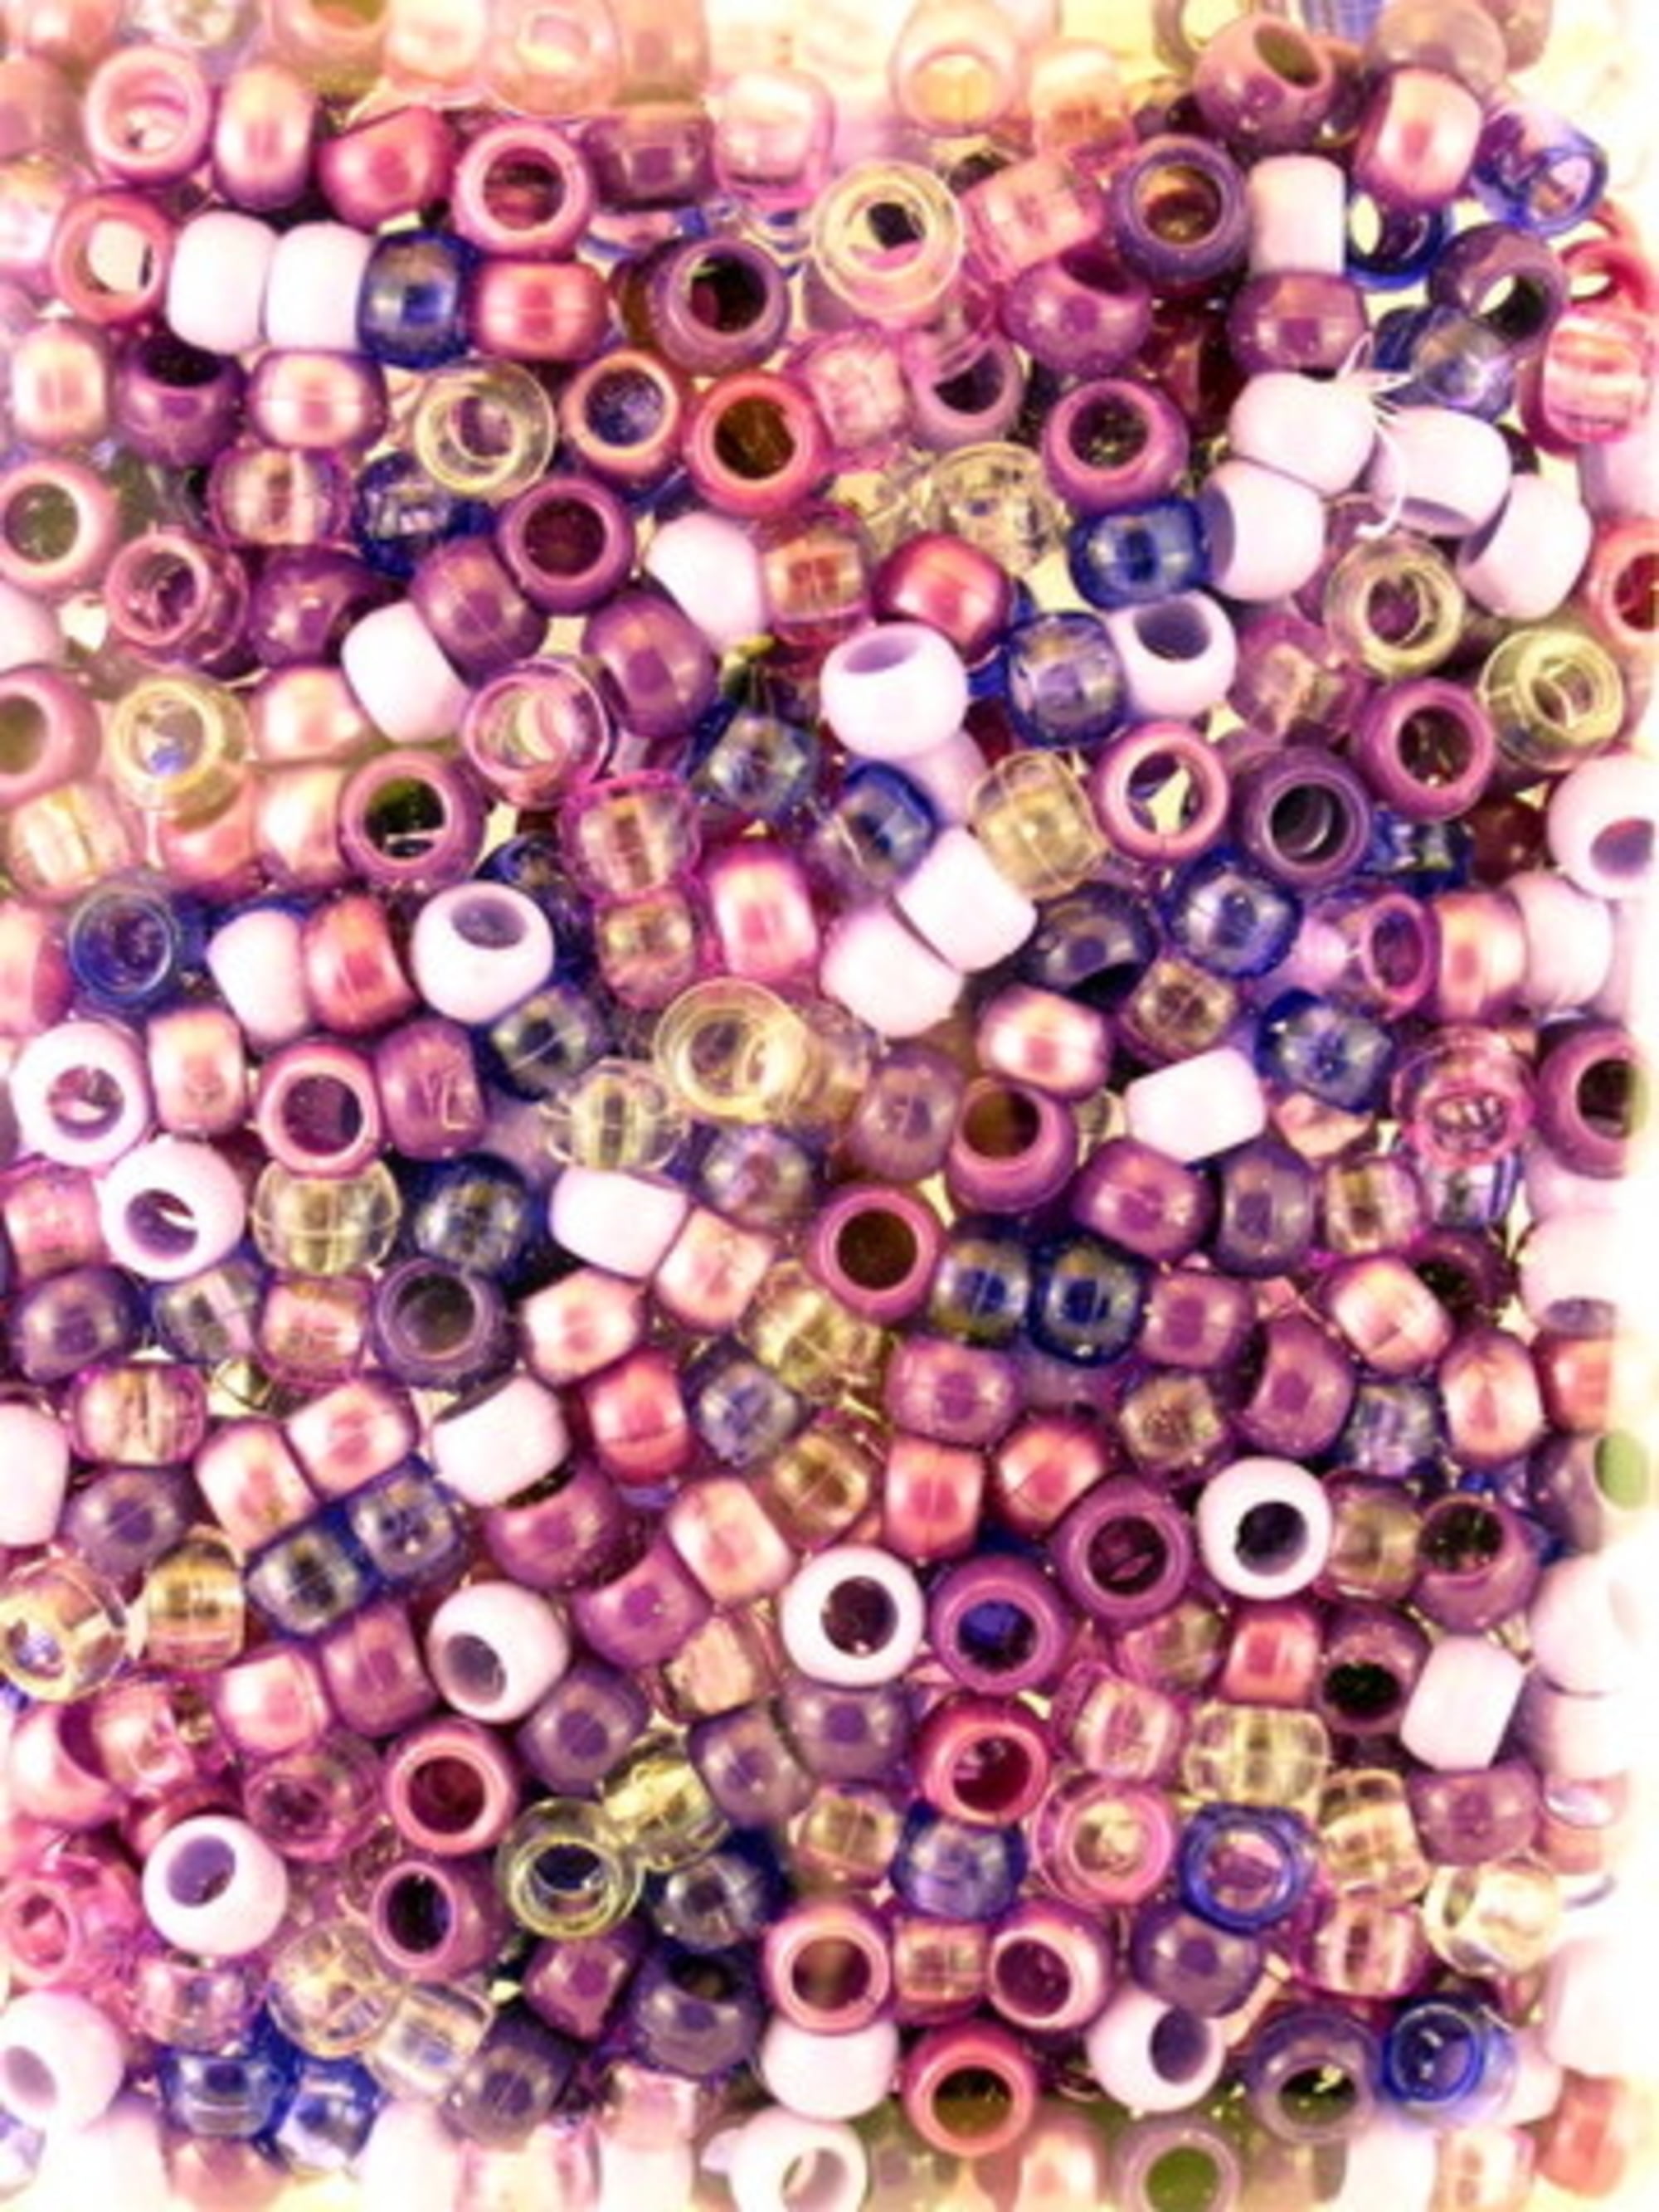  Colorations Pink Pony Beads, 1/2 lb. Approx. 800 Pcs in  Resealable Stand-Up Storage, Accent Beads, Hair Accessory, Slime,  Stringing, Learn, Teachers, Kids, Creative, Arts & Crafts (Item # SPONYPI)  : Office Products